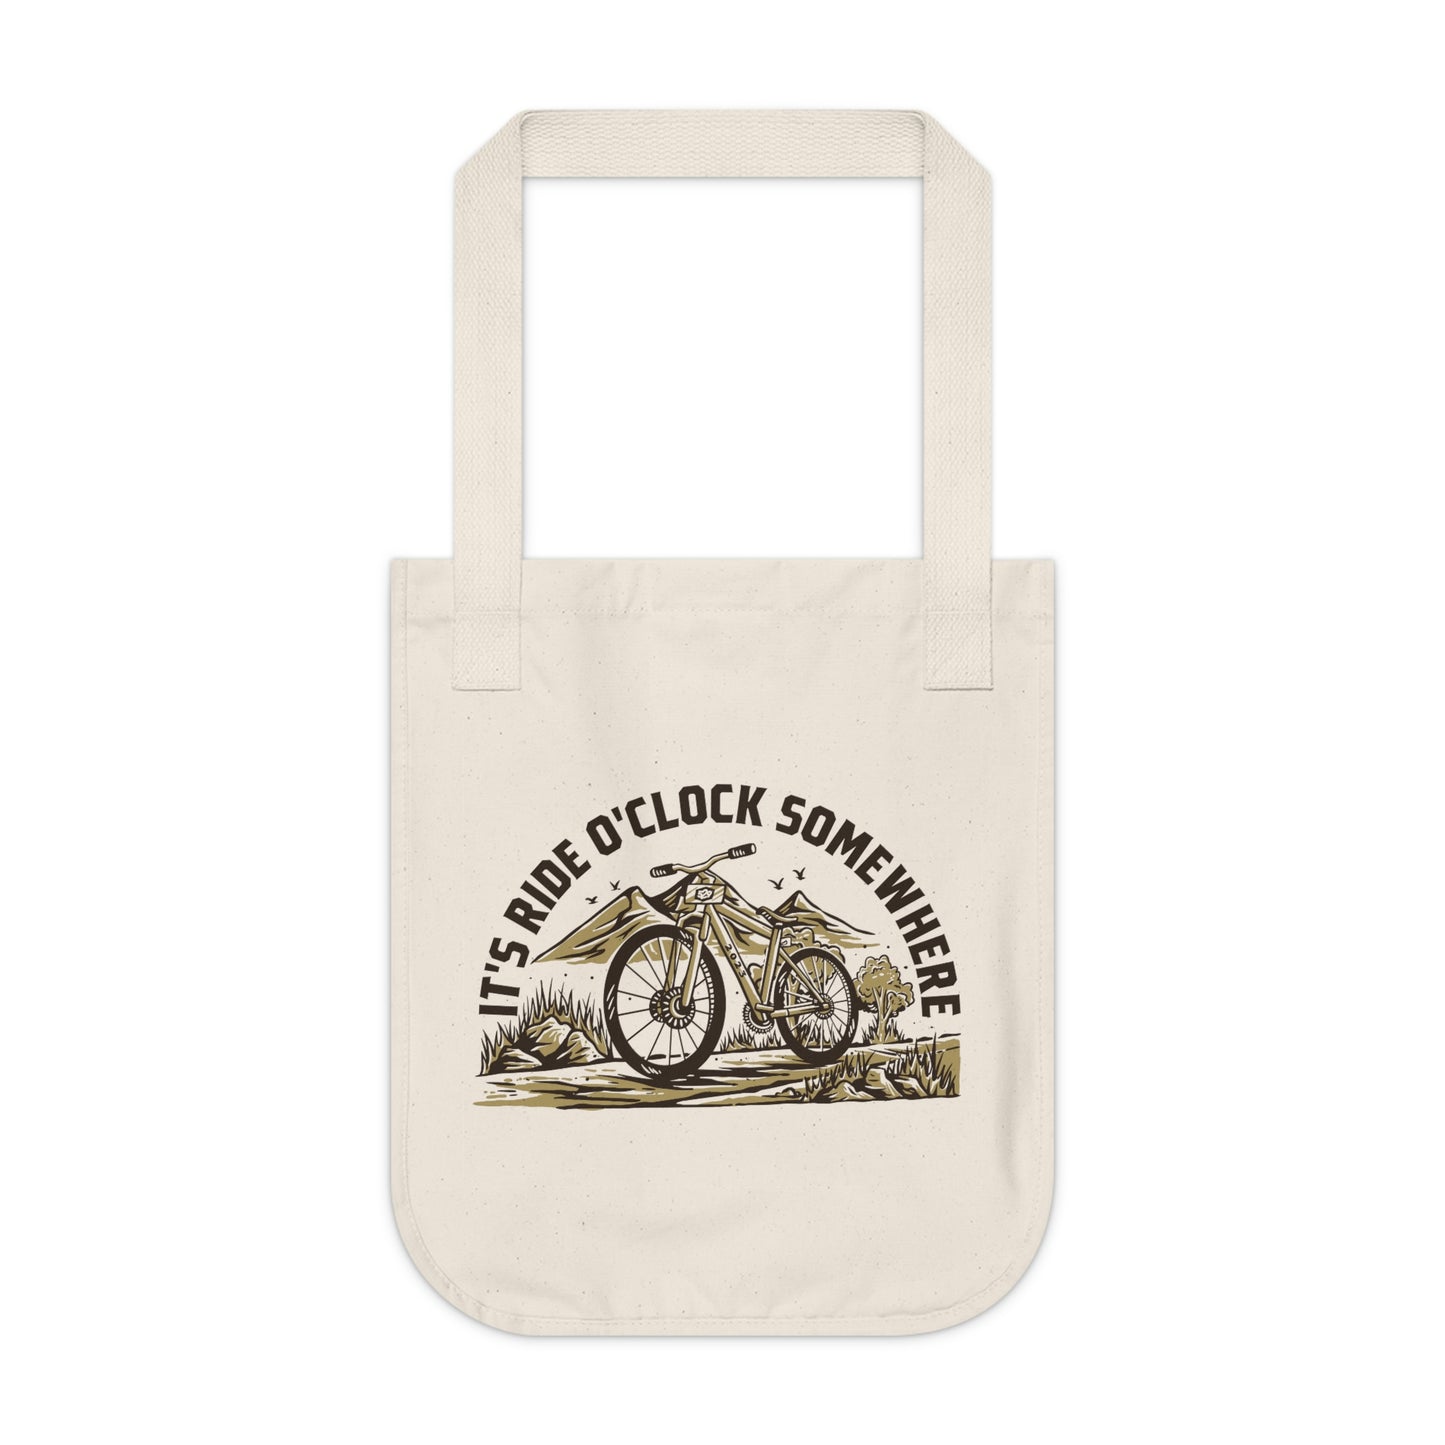 2023 529 Garage Limited Edition "It's ride o'clock somewhere" Organic Canvas Tote Bag